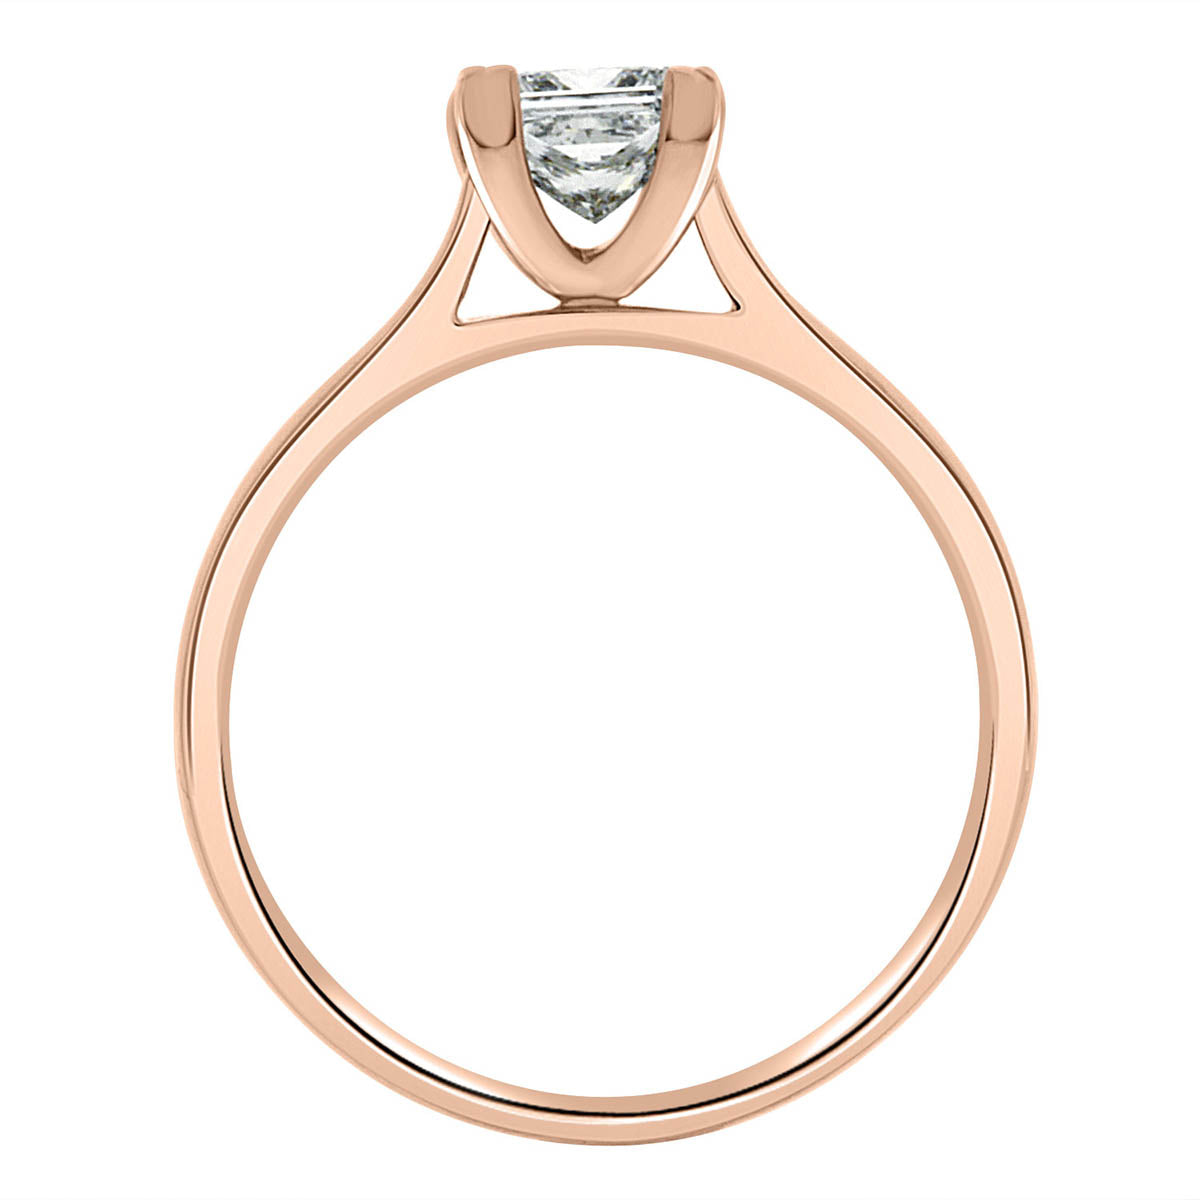 Princess Cut Solitaire engagement ring made from rose gold standing upright